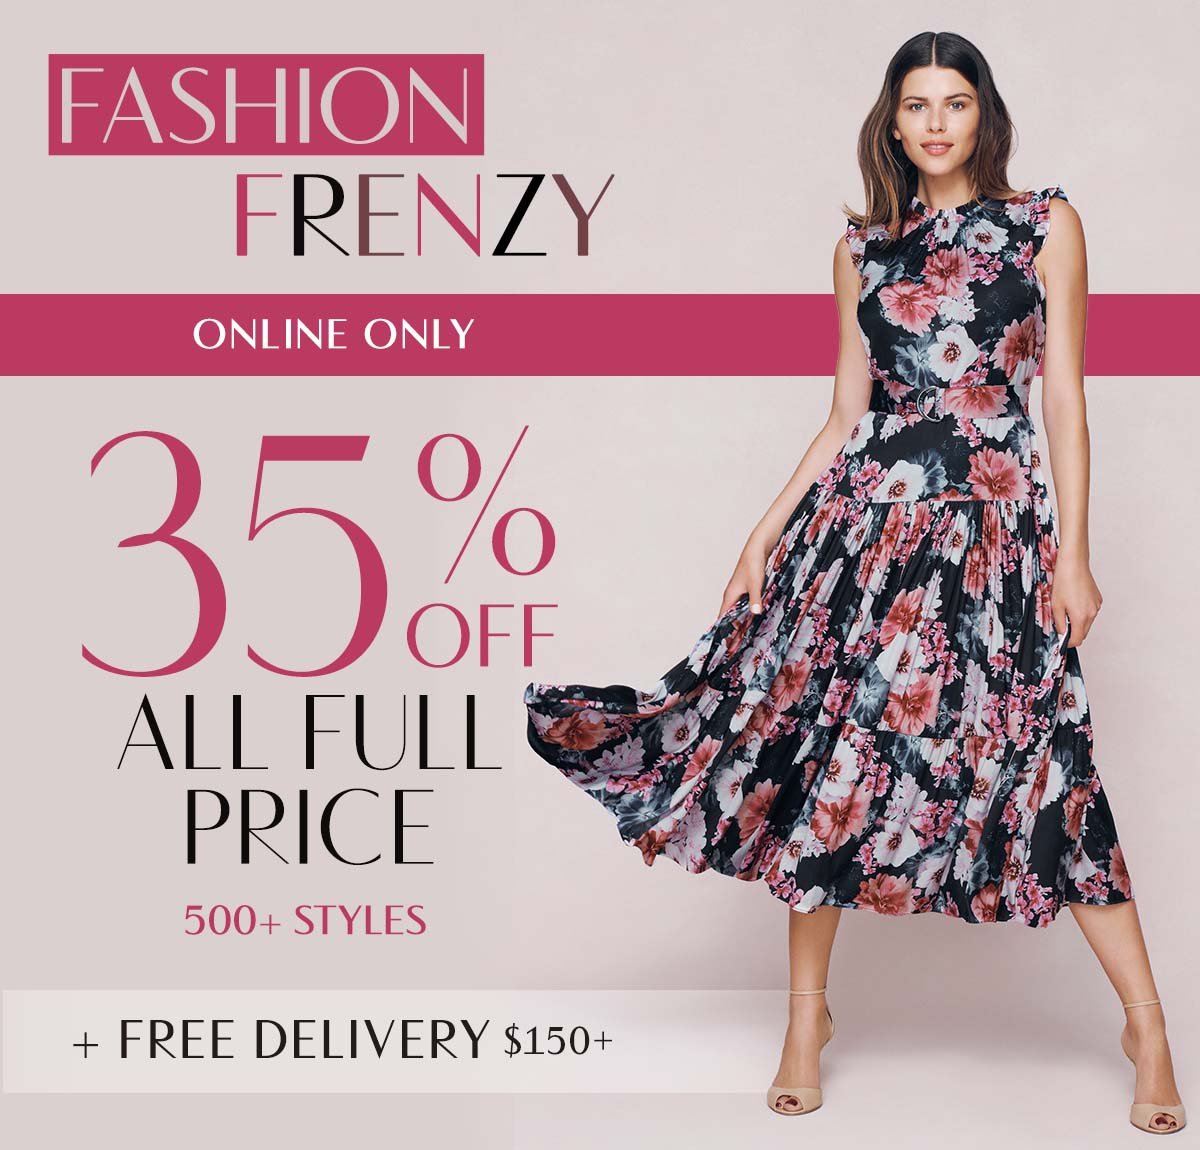 Fashion Frenzy. Online Only. 35% Off All Full Price 500+ Styles. Free Delivery $150+